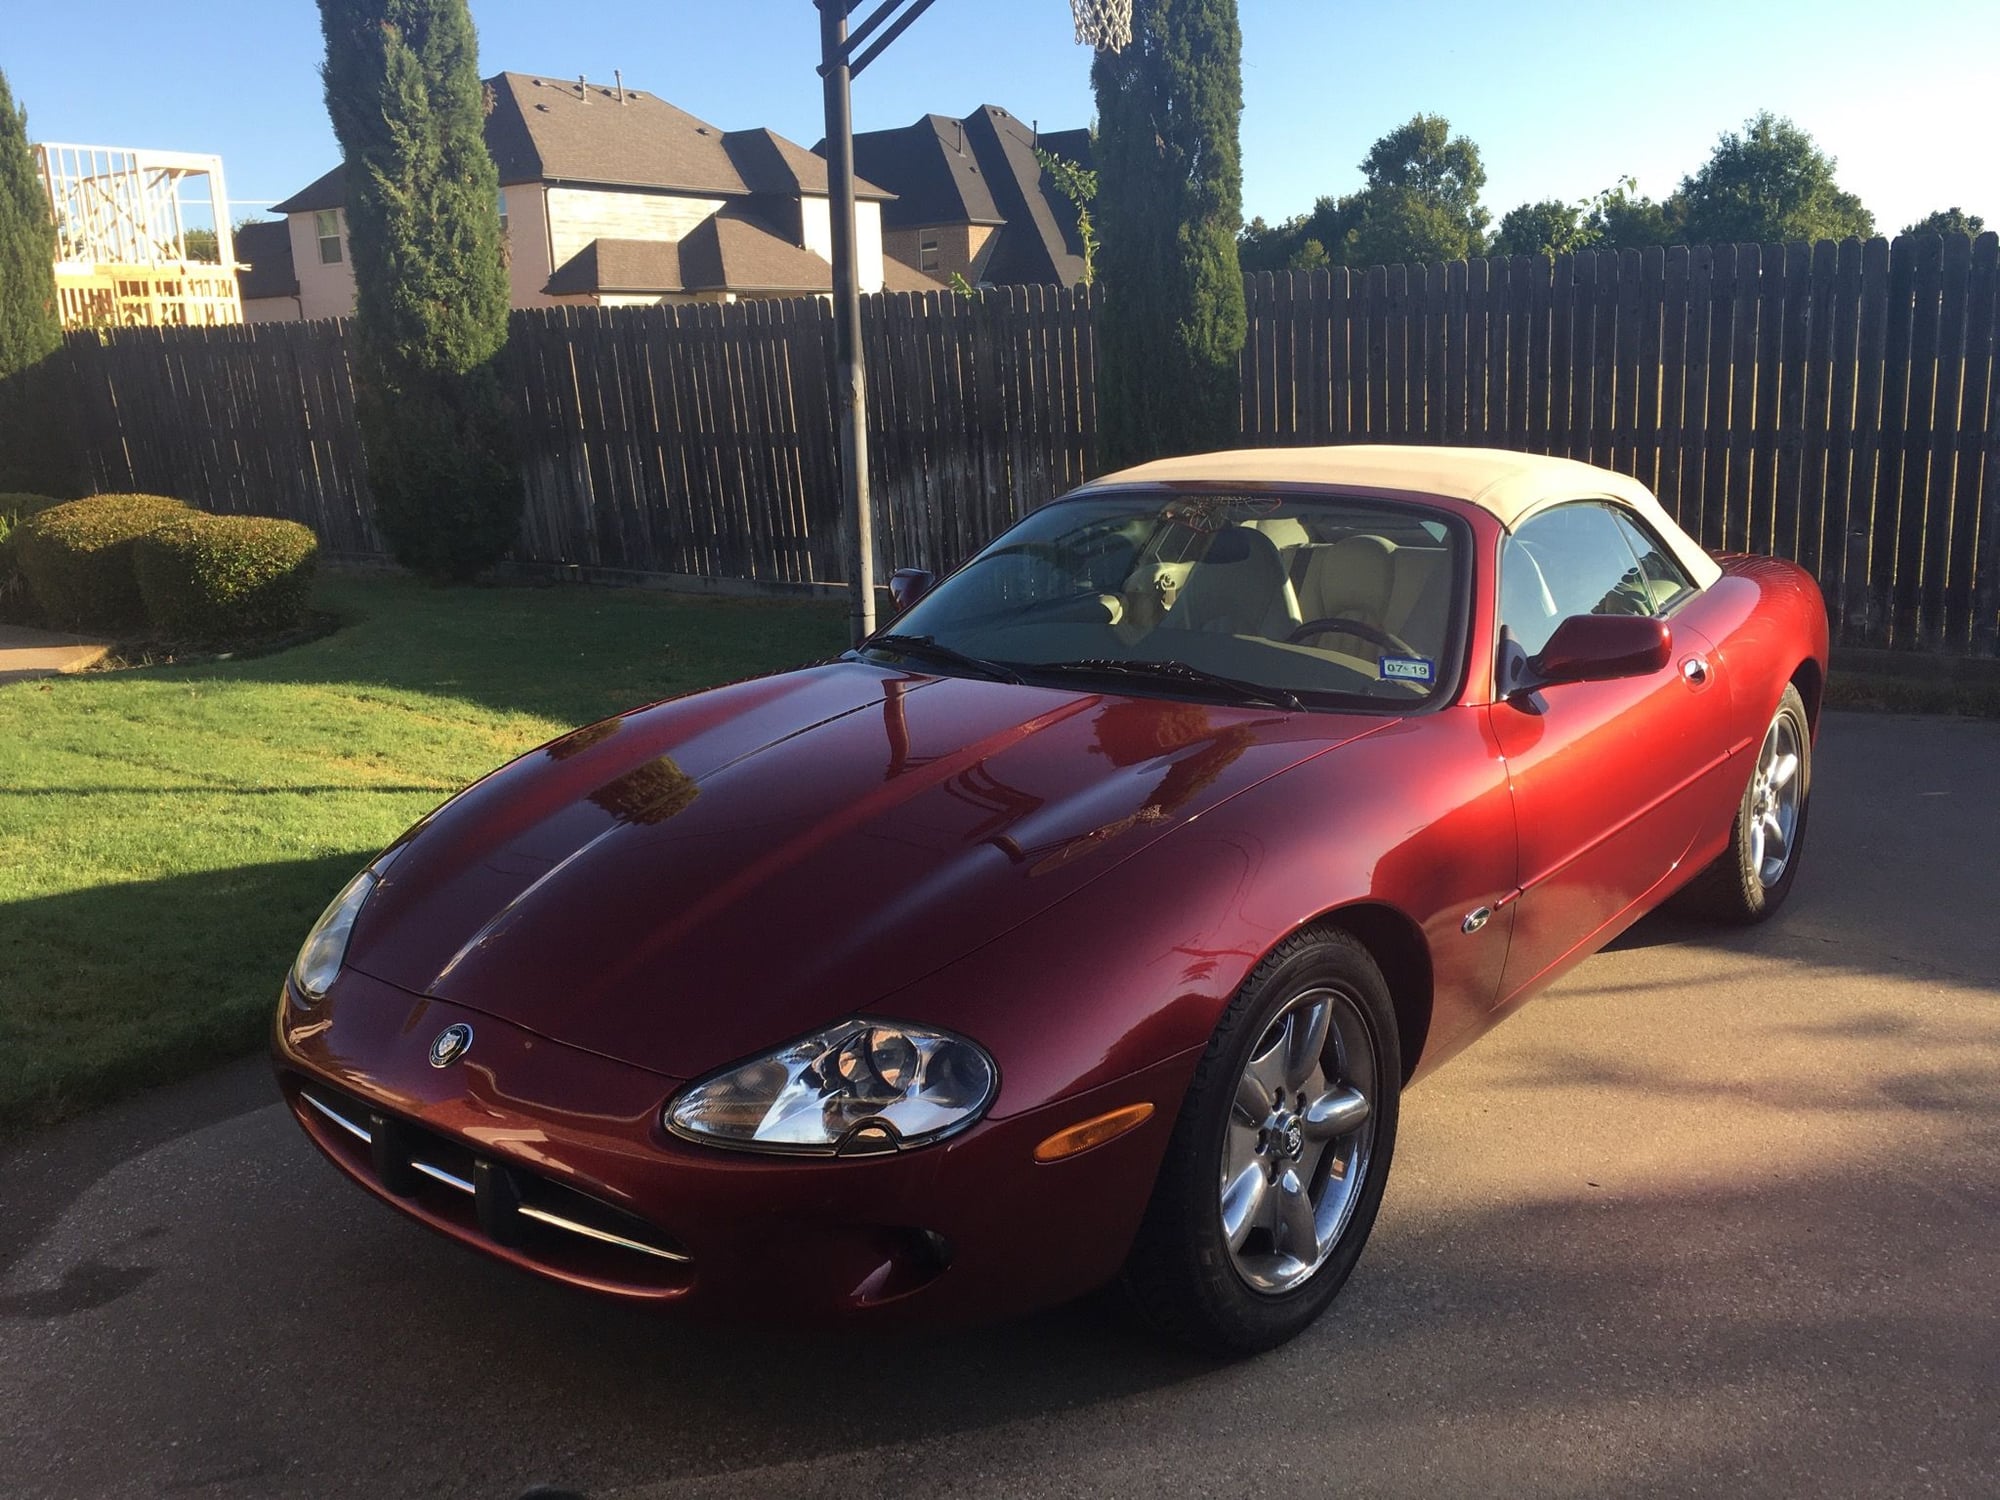 1998 Jaguar XK8 - 98 xk8 Convertible low miles - Used - VIN SAJGX2241WC018912 - 38,500 Miles - 6 cyl - 2WD - Automatic - Convertible - Red - W Saint Paul, MN 55118, United States